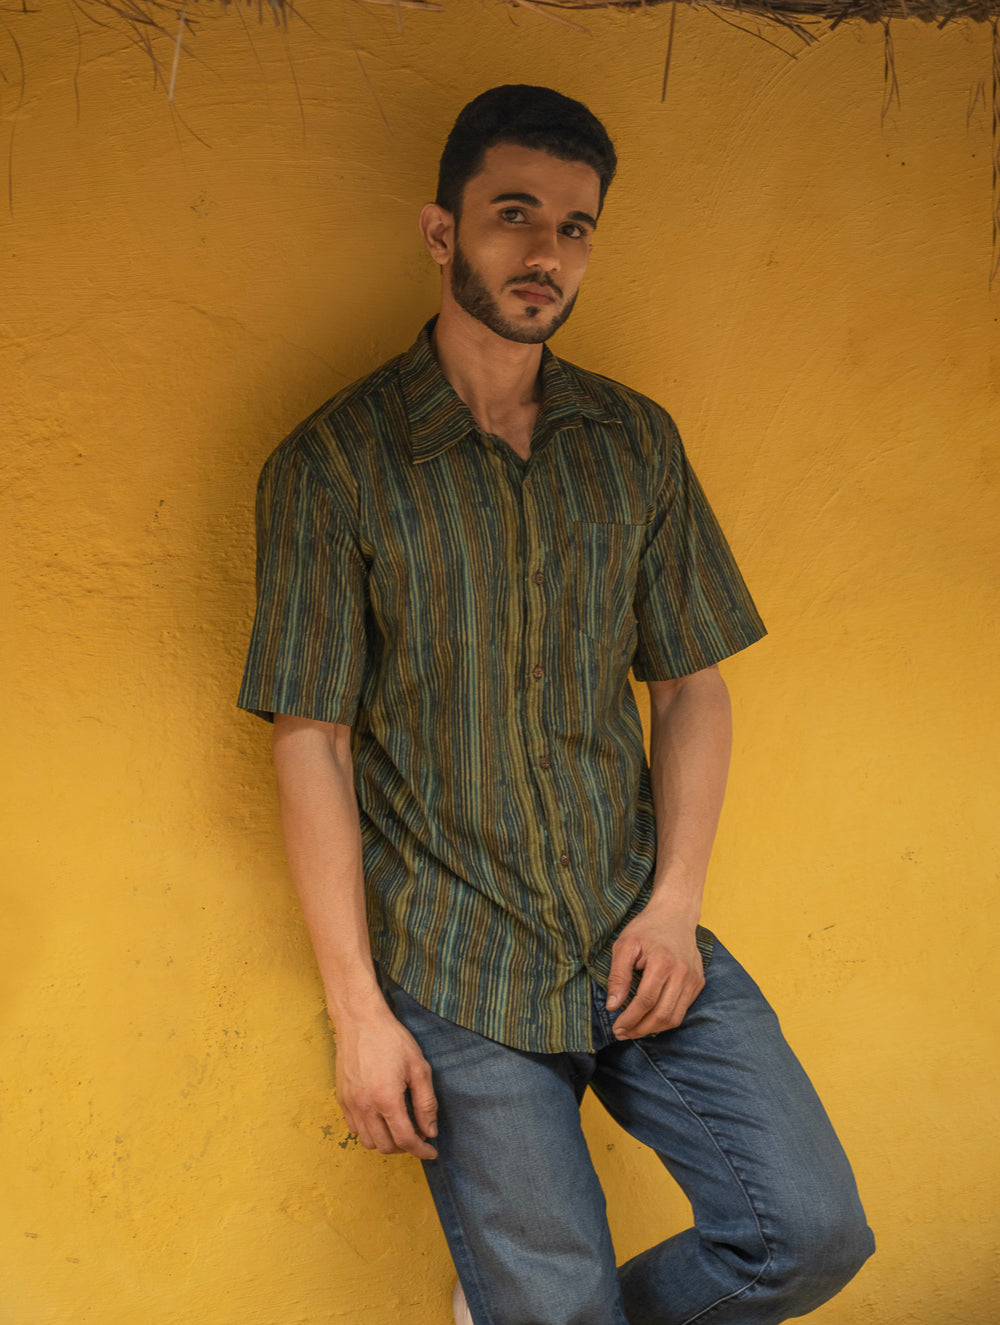 Load image into Gallery viewer, Bagru Hand Block Printed Cotton Shirt - Olive Stripes